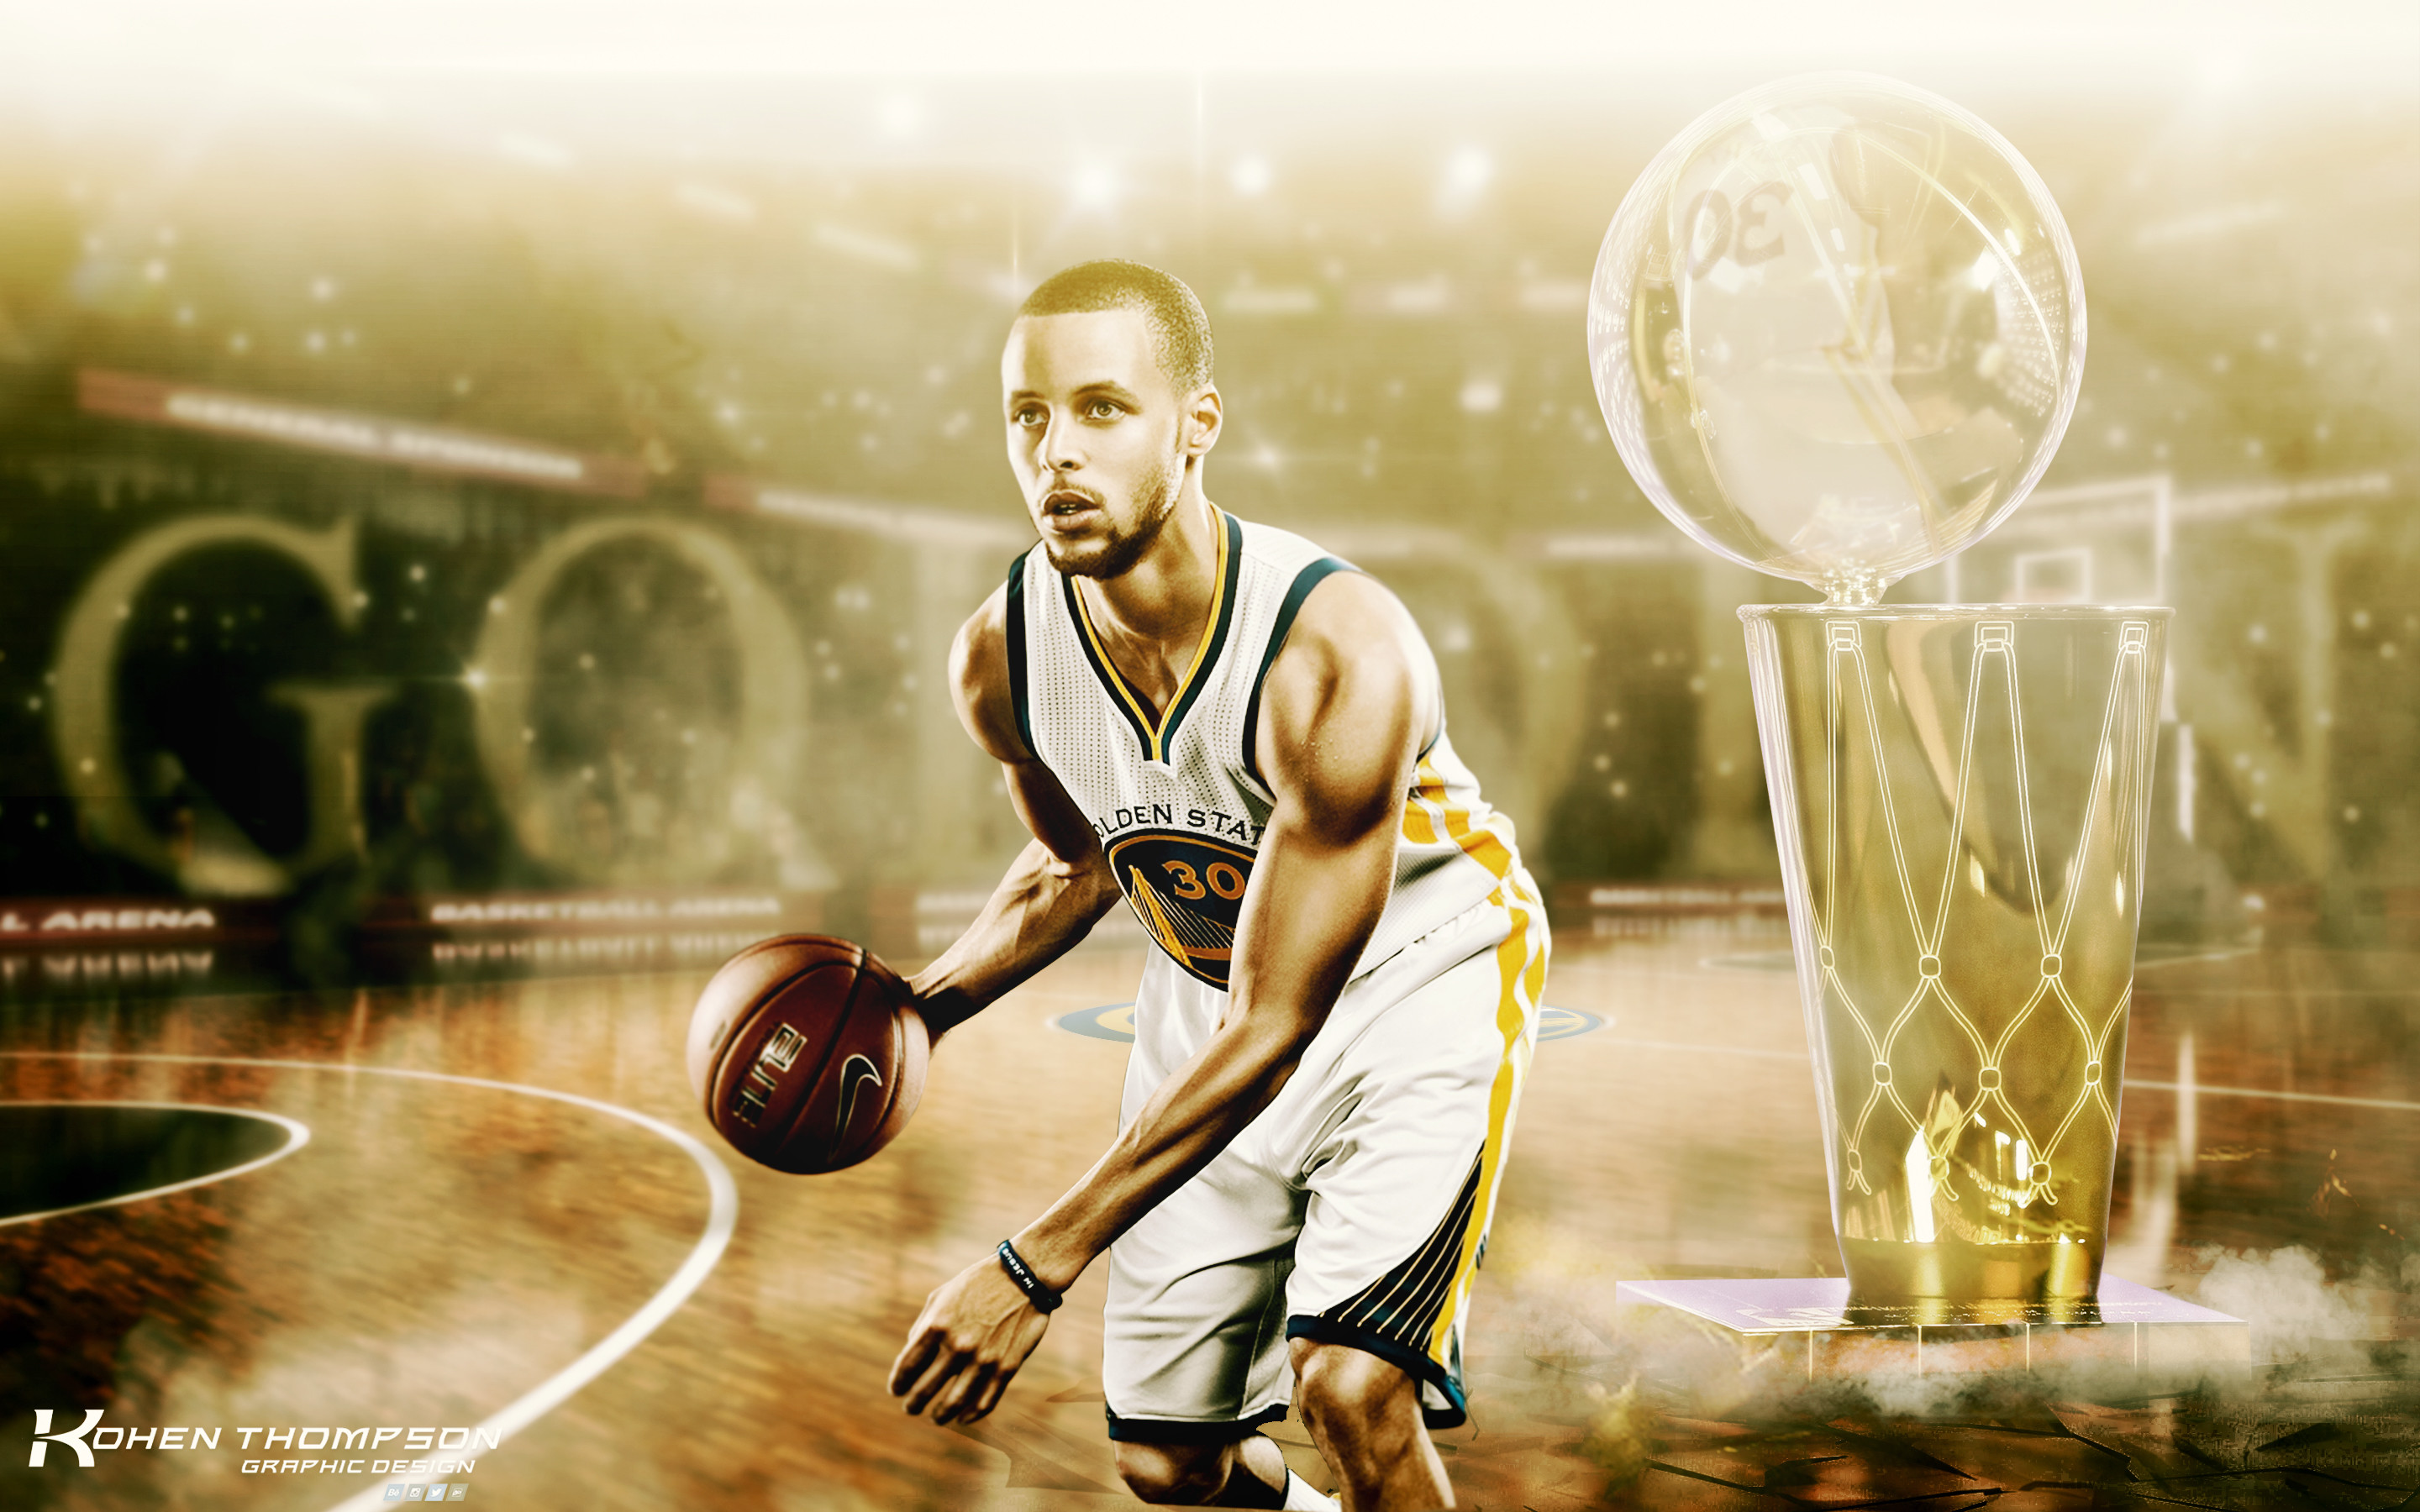 2880x1800 Stephen Curry Wallpaper by kohentdesign Stephen Curry Wallpaper by  kohentdesign